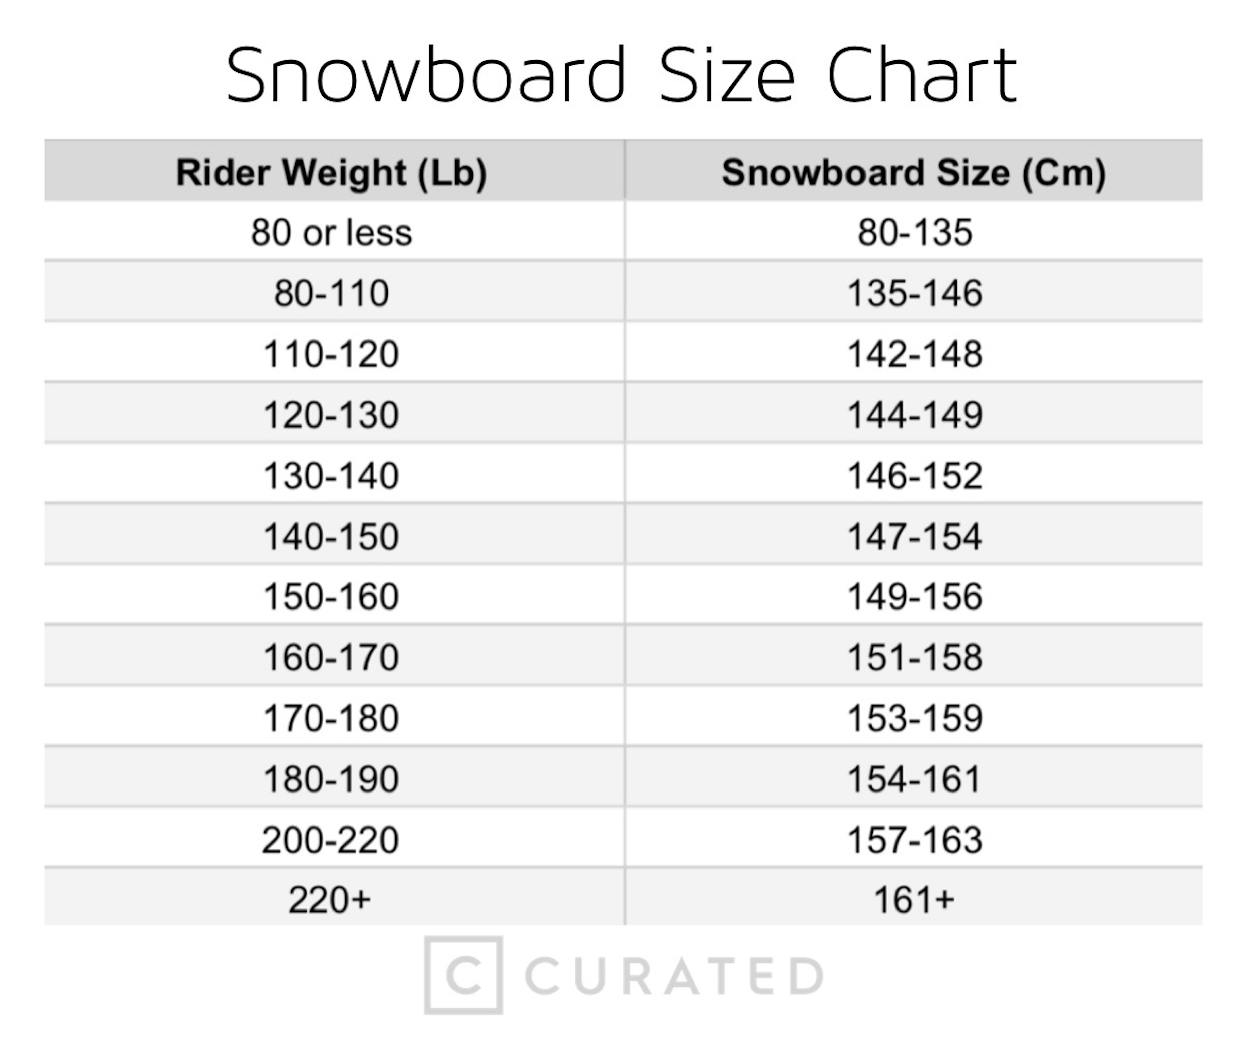 What Size Snowboard is Right for You?